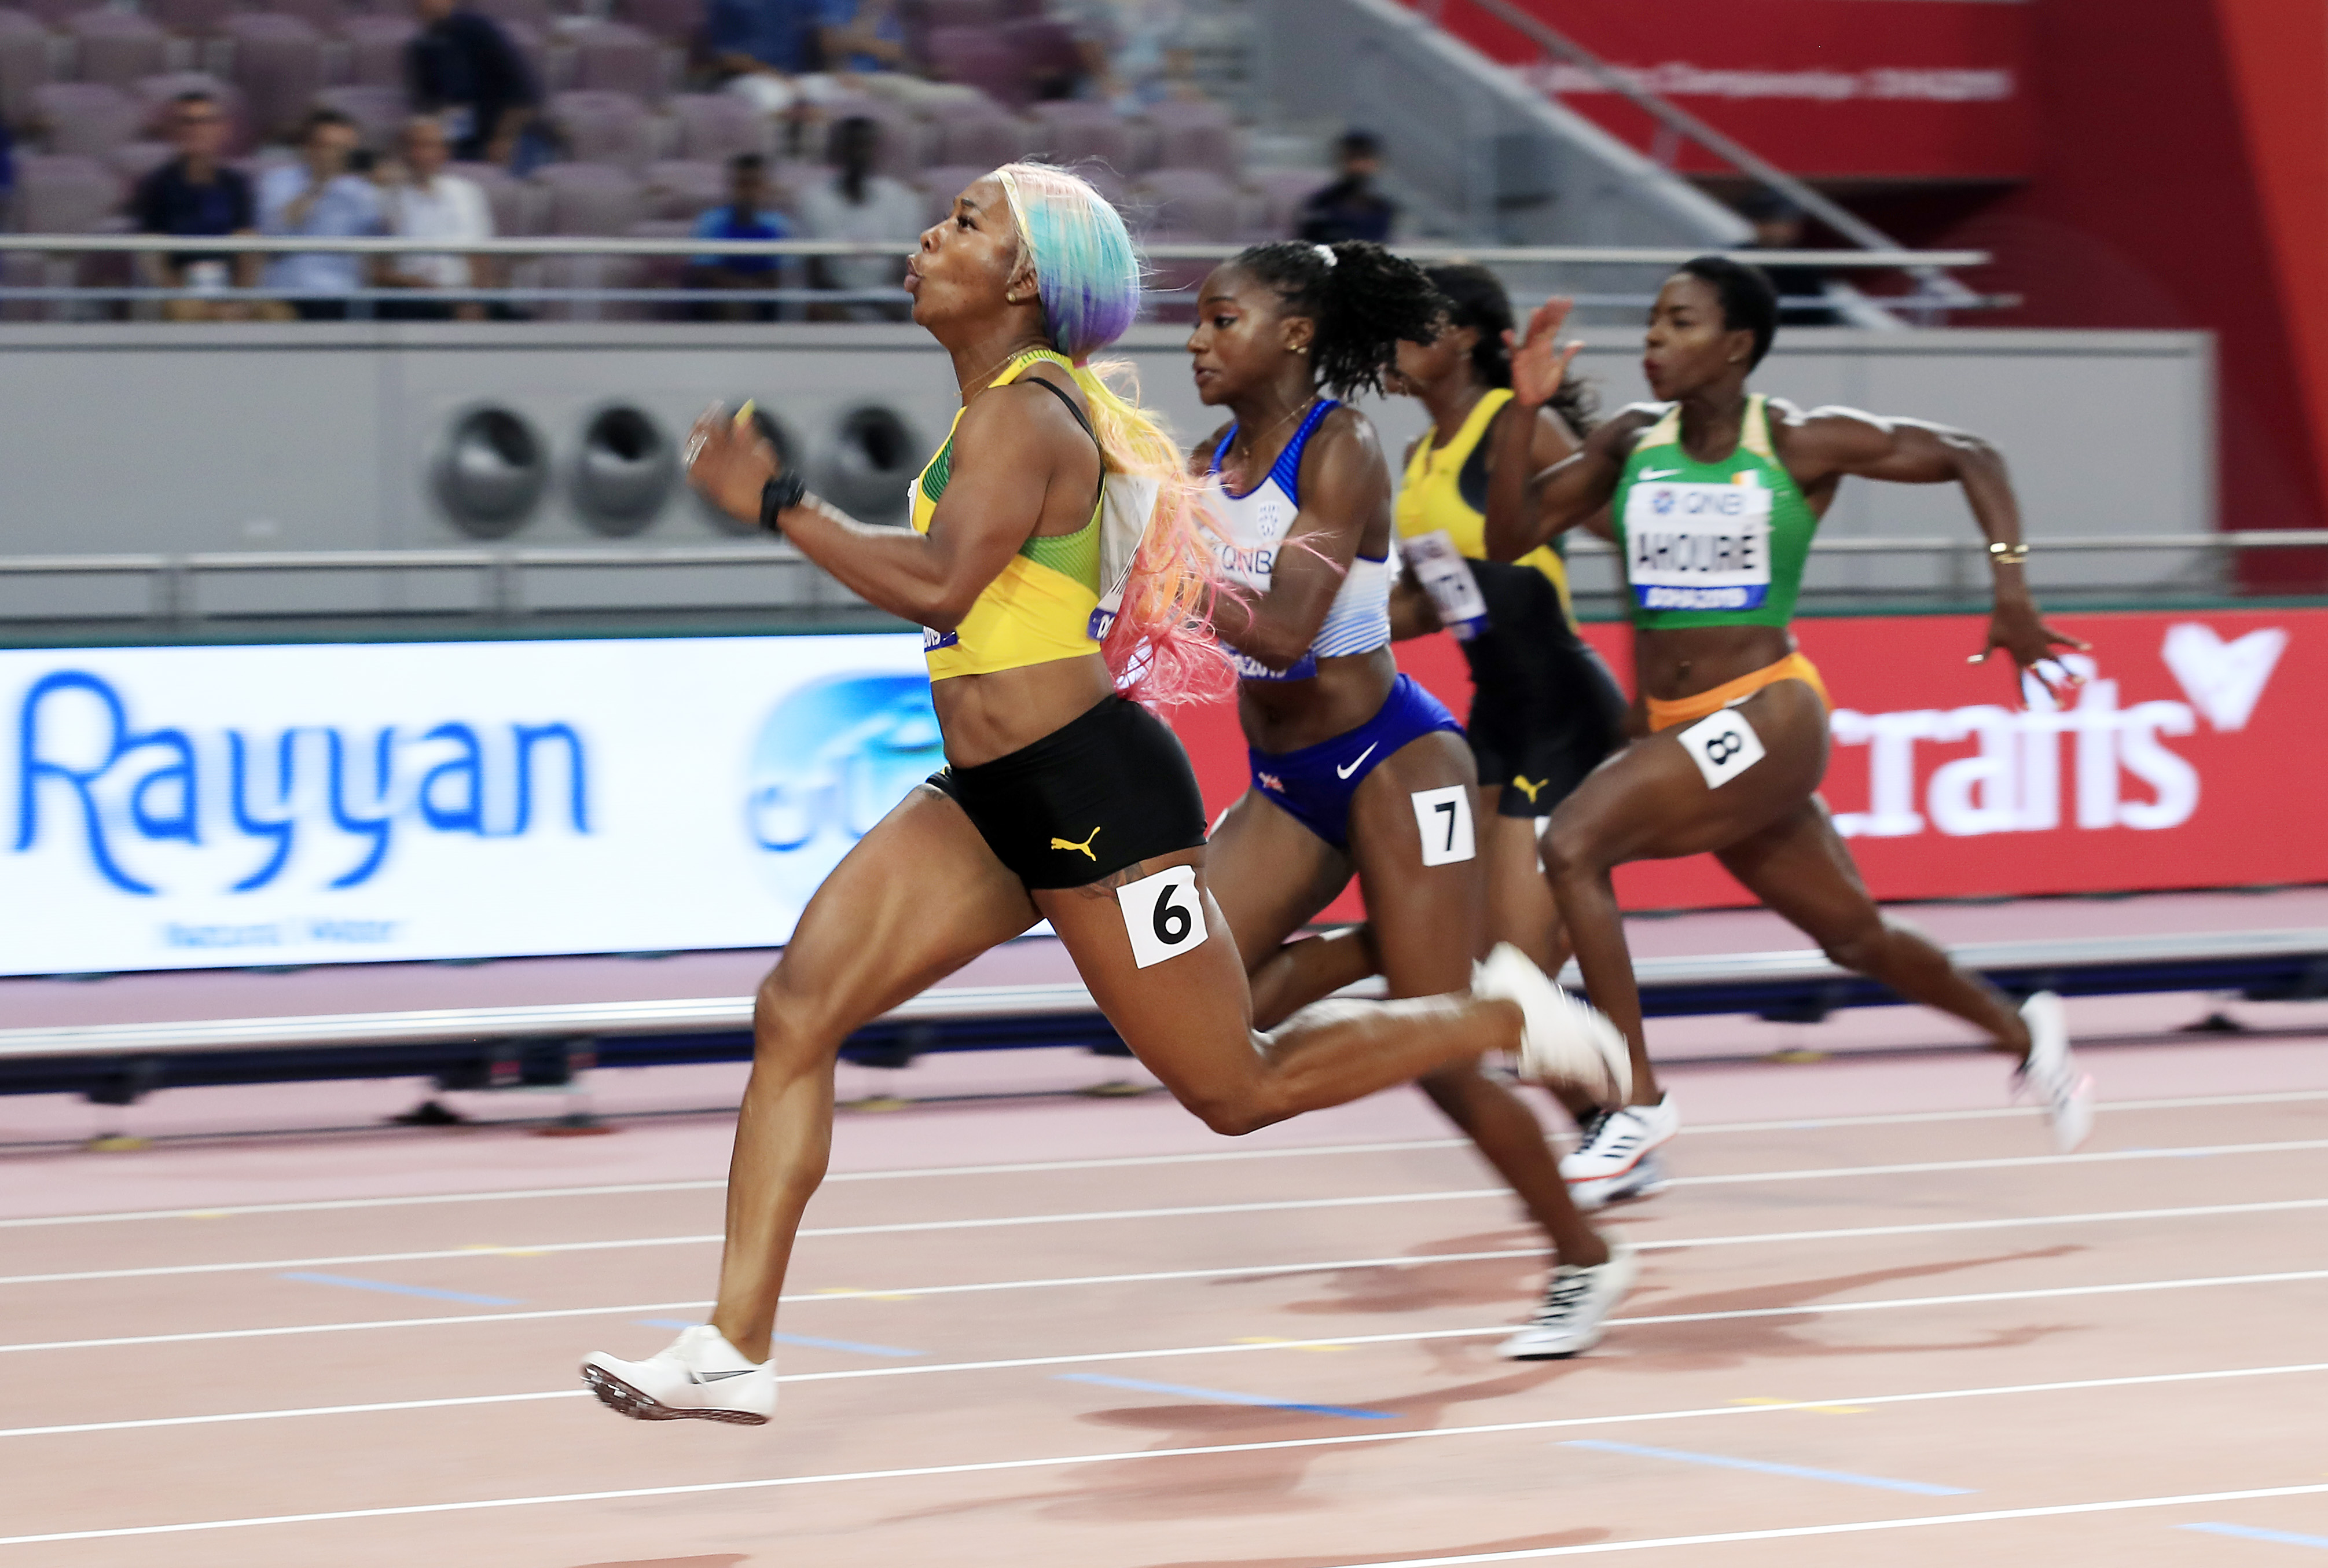 Fraser-Pryce clears air on retirement plans